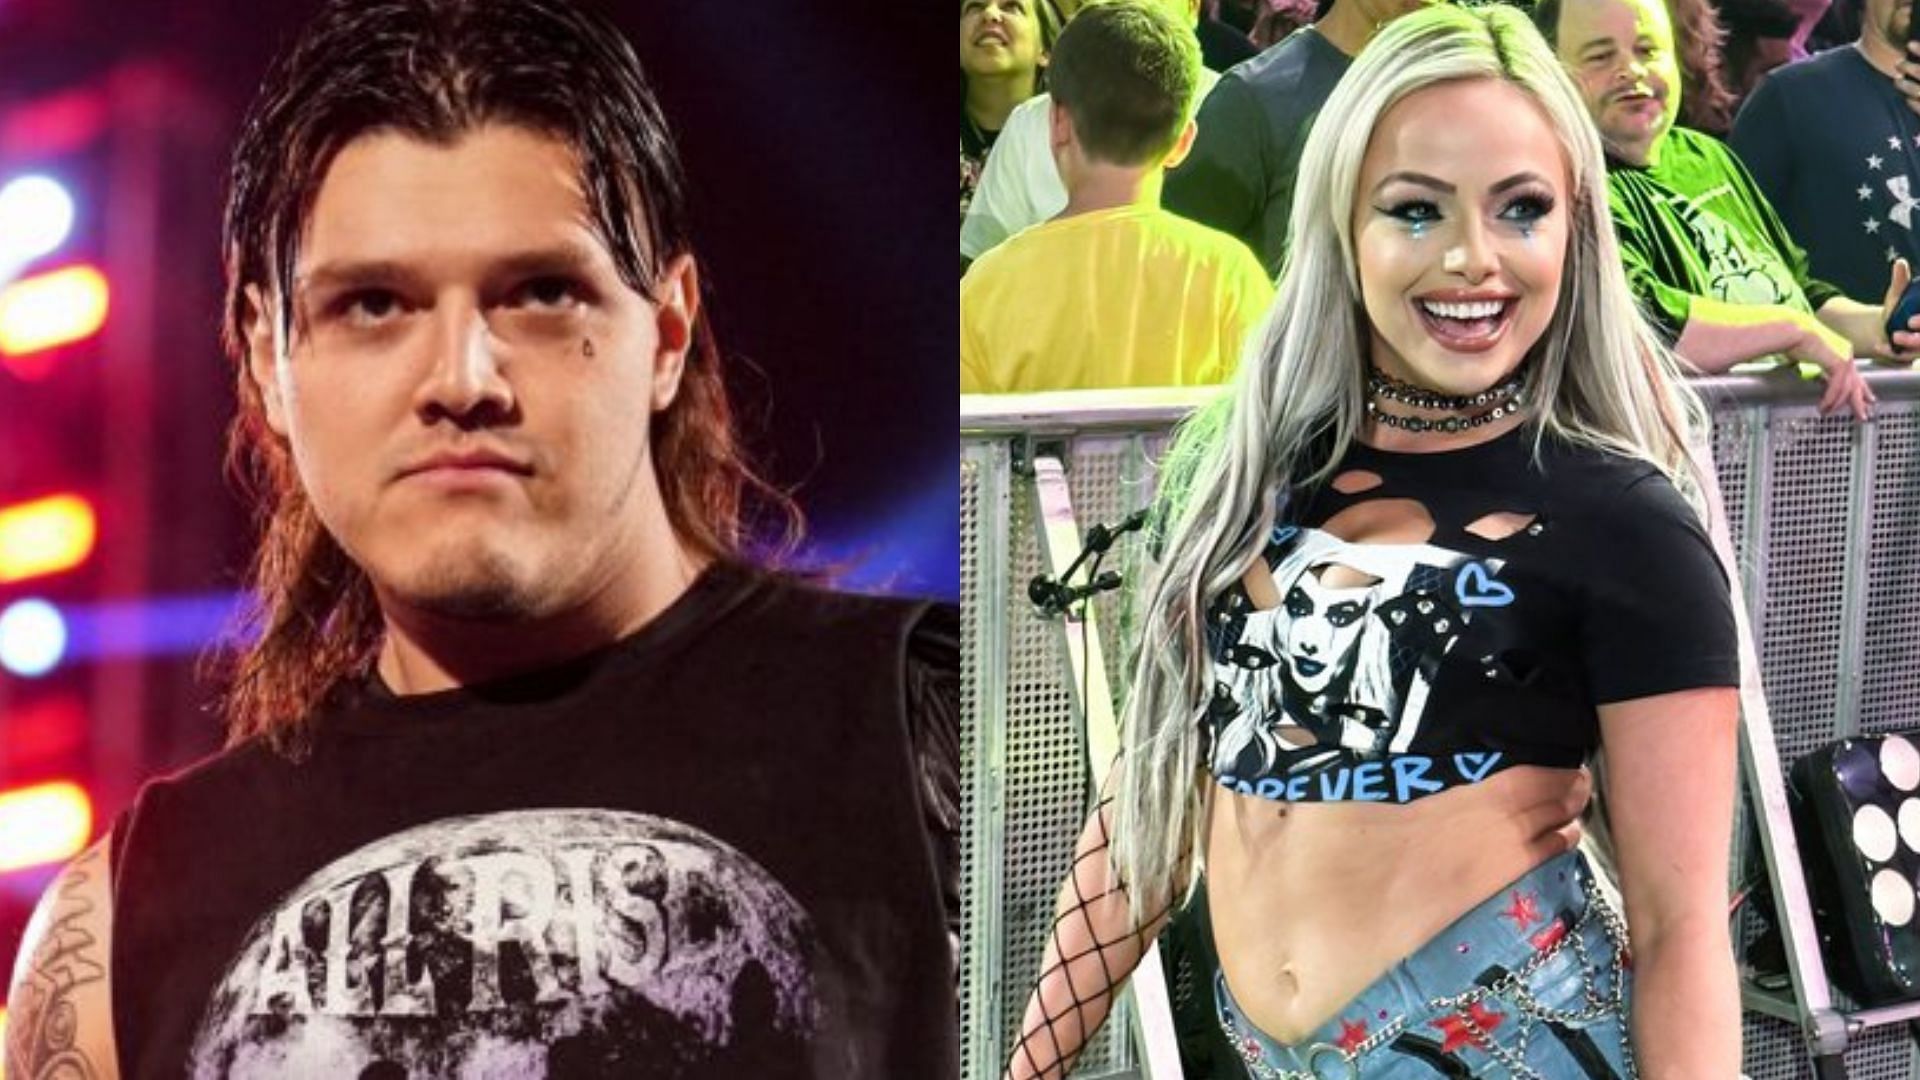 Dominik Mysterio put Liv Morgan on notice after her injury